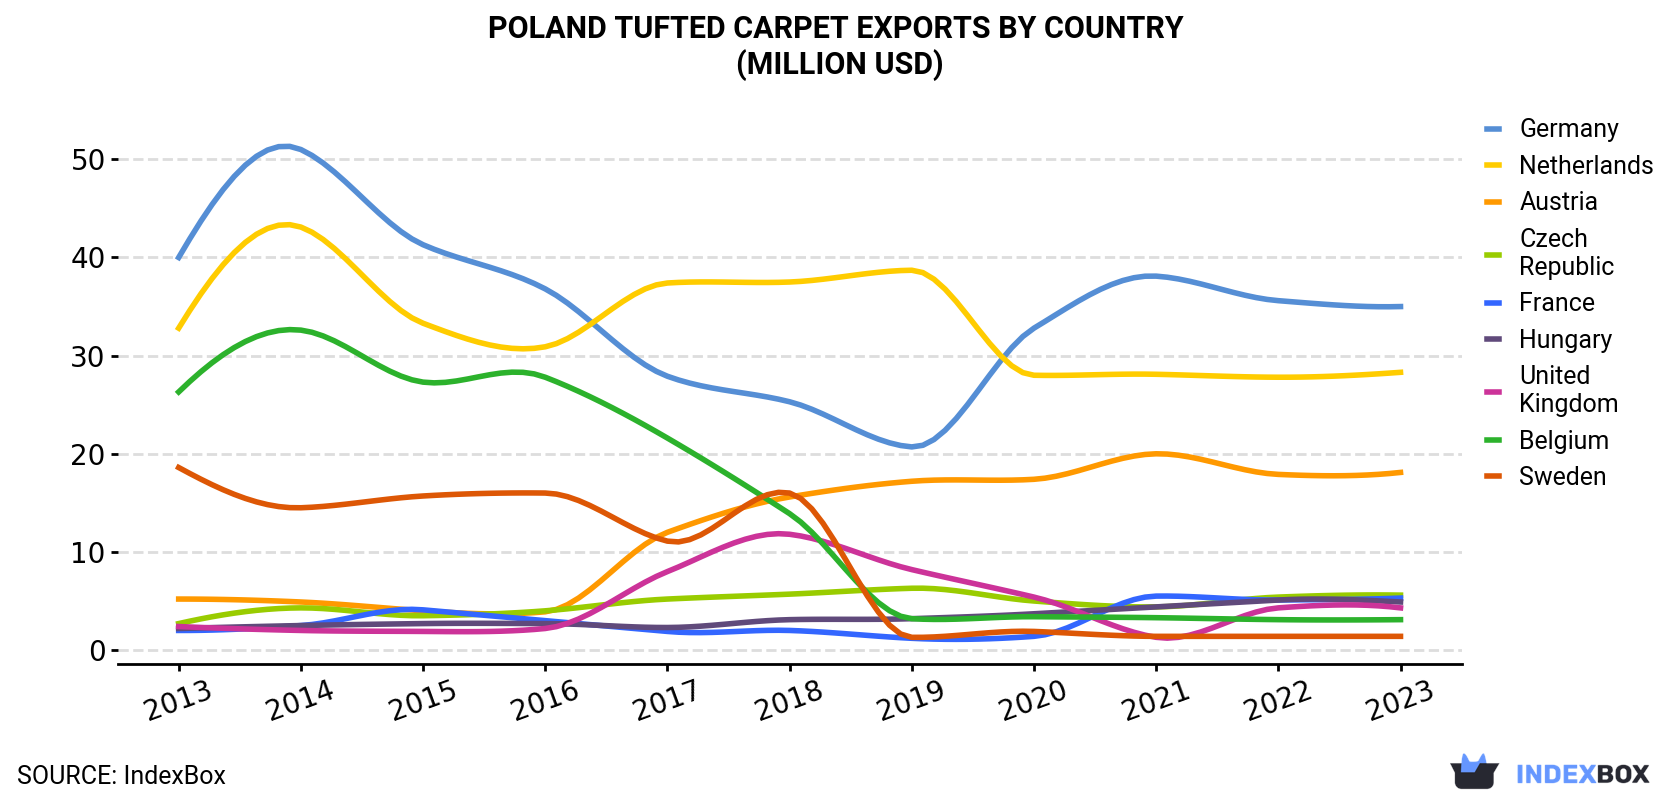 Poland Tufted Carpet Exports By Country (Million USD)